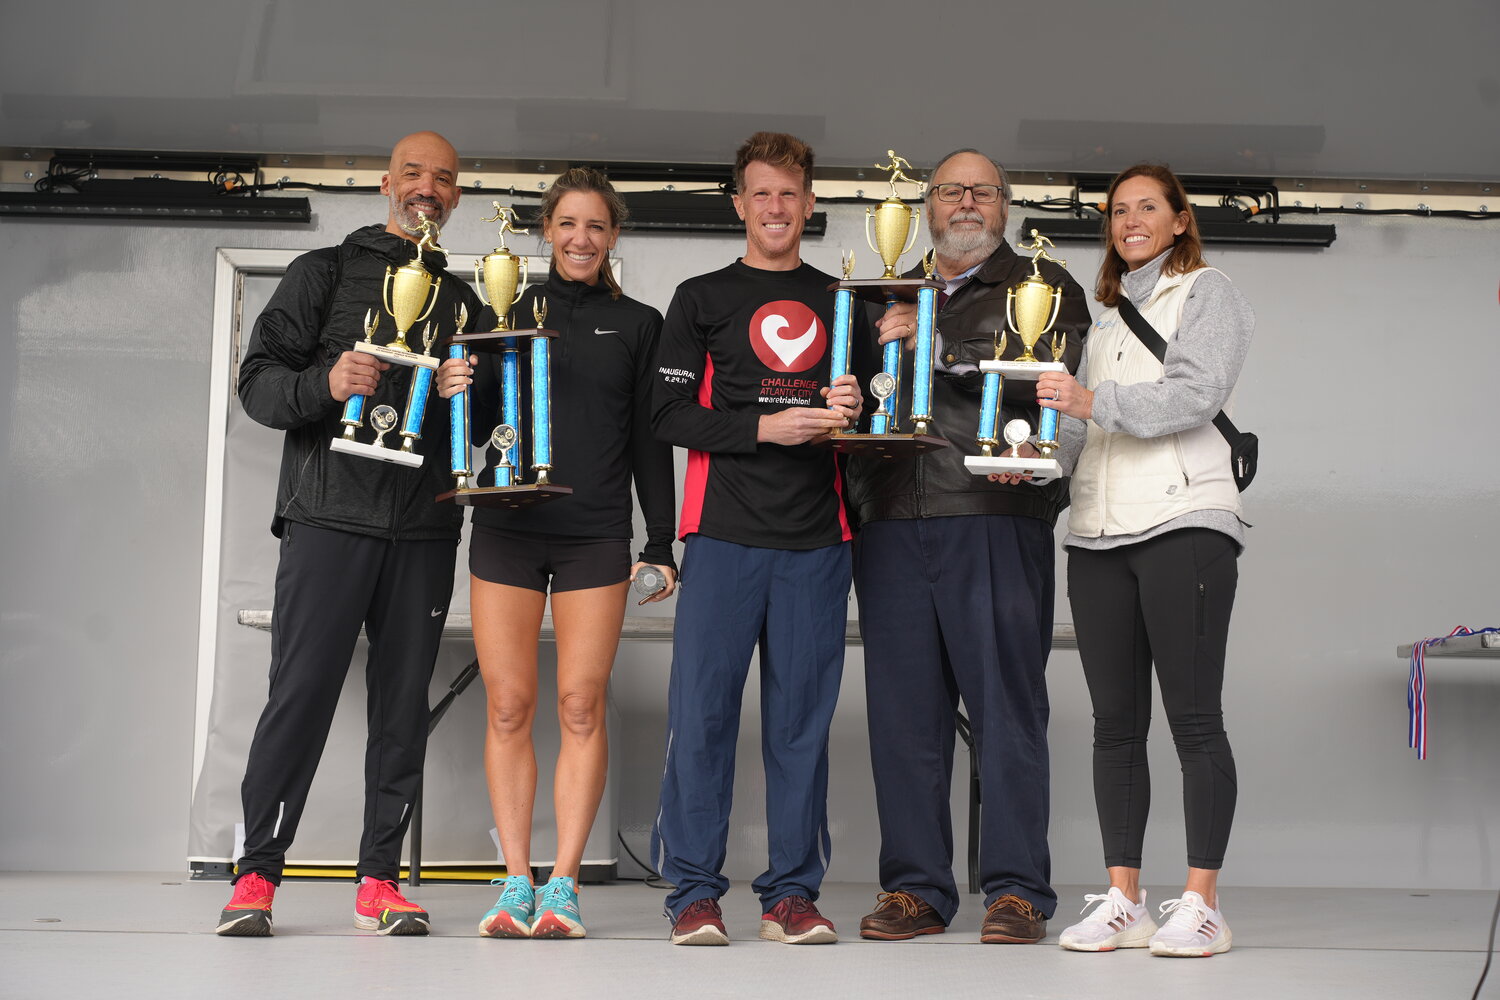 Samantha Augeri, second from left, and David Putterman, center, were presented with first-place trophies for their performance during the annual 5k race. Nassau County Legislator-elect Scott Davis, Rockville Centre Mayor Francis Murray and Village Trustee Katie Conlon join them in presenting the awards.